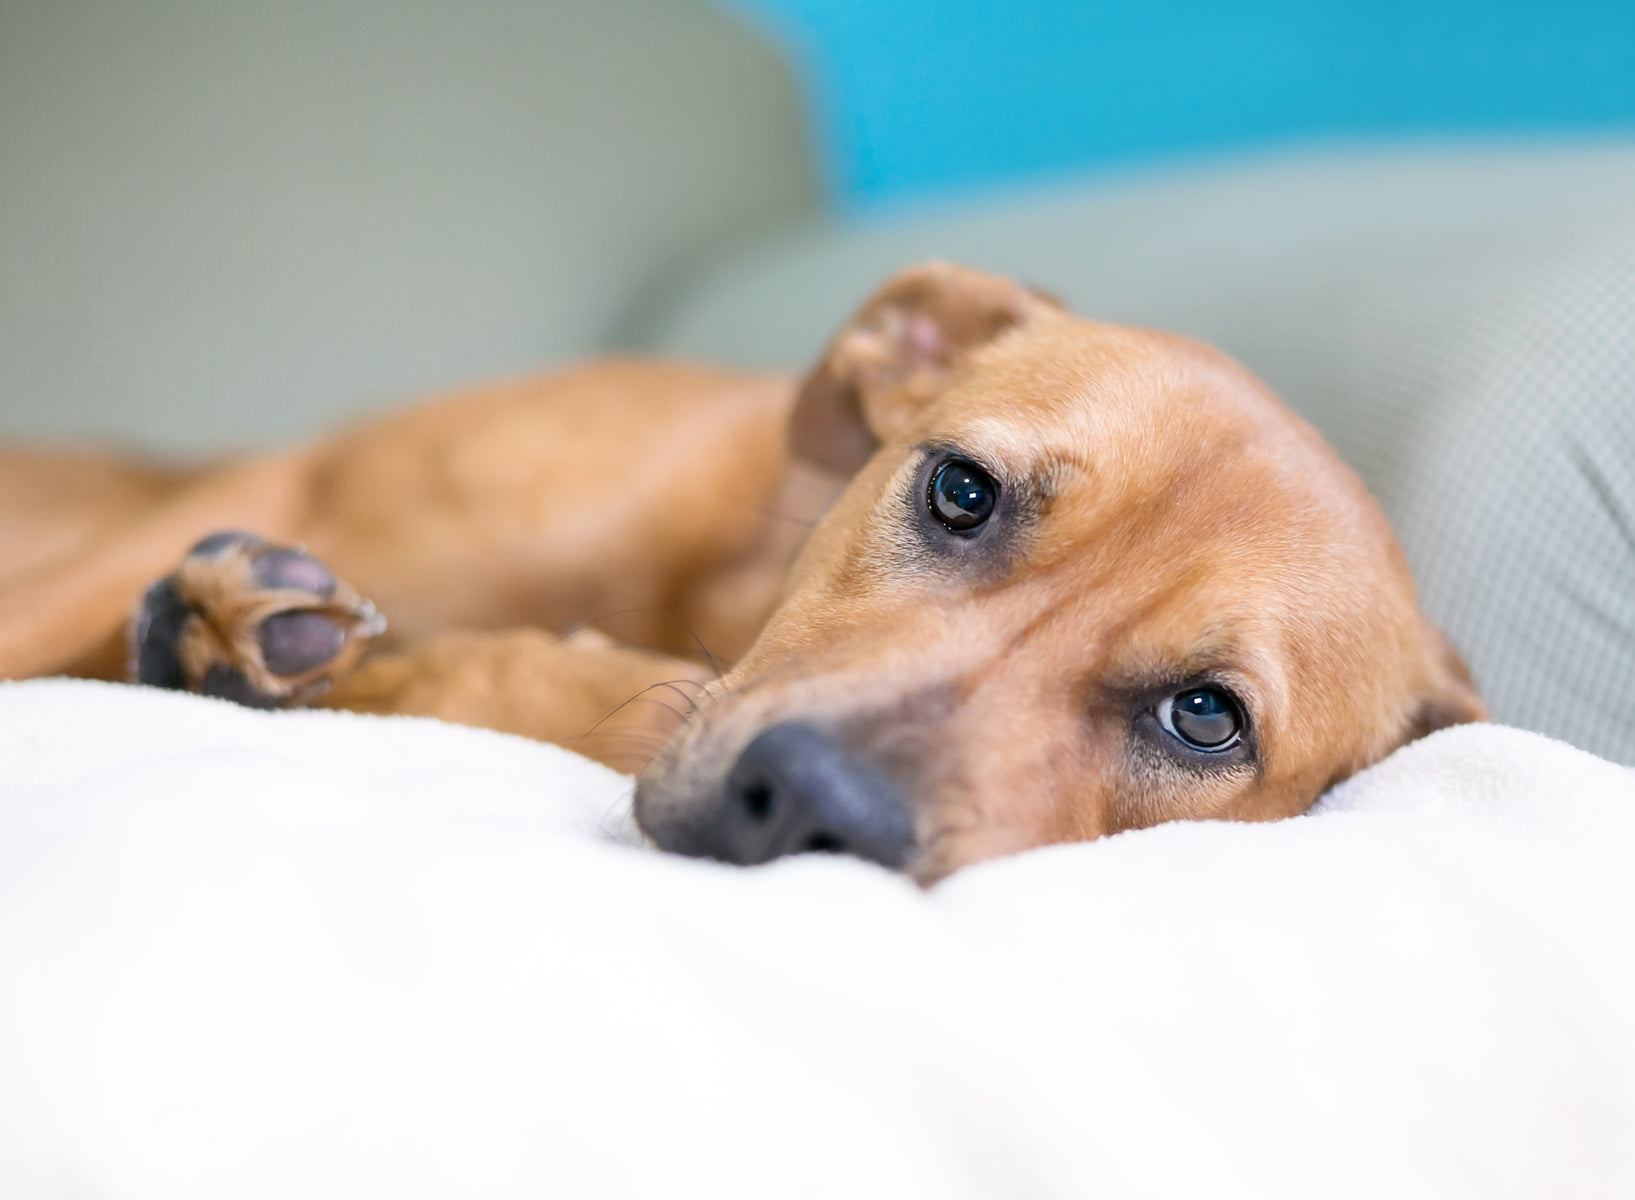 You Should Check Out These 7 Natural Remedies for Roundworms in Dogs